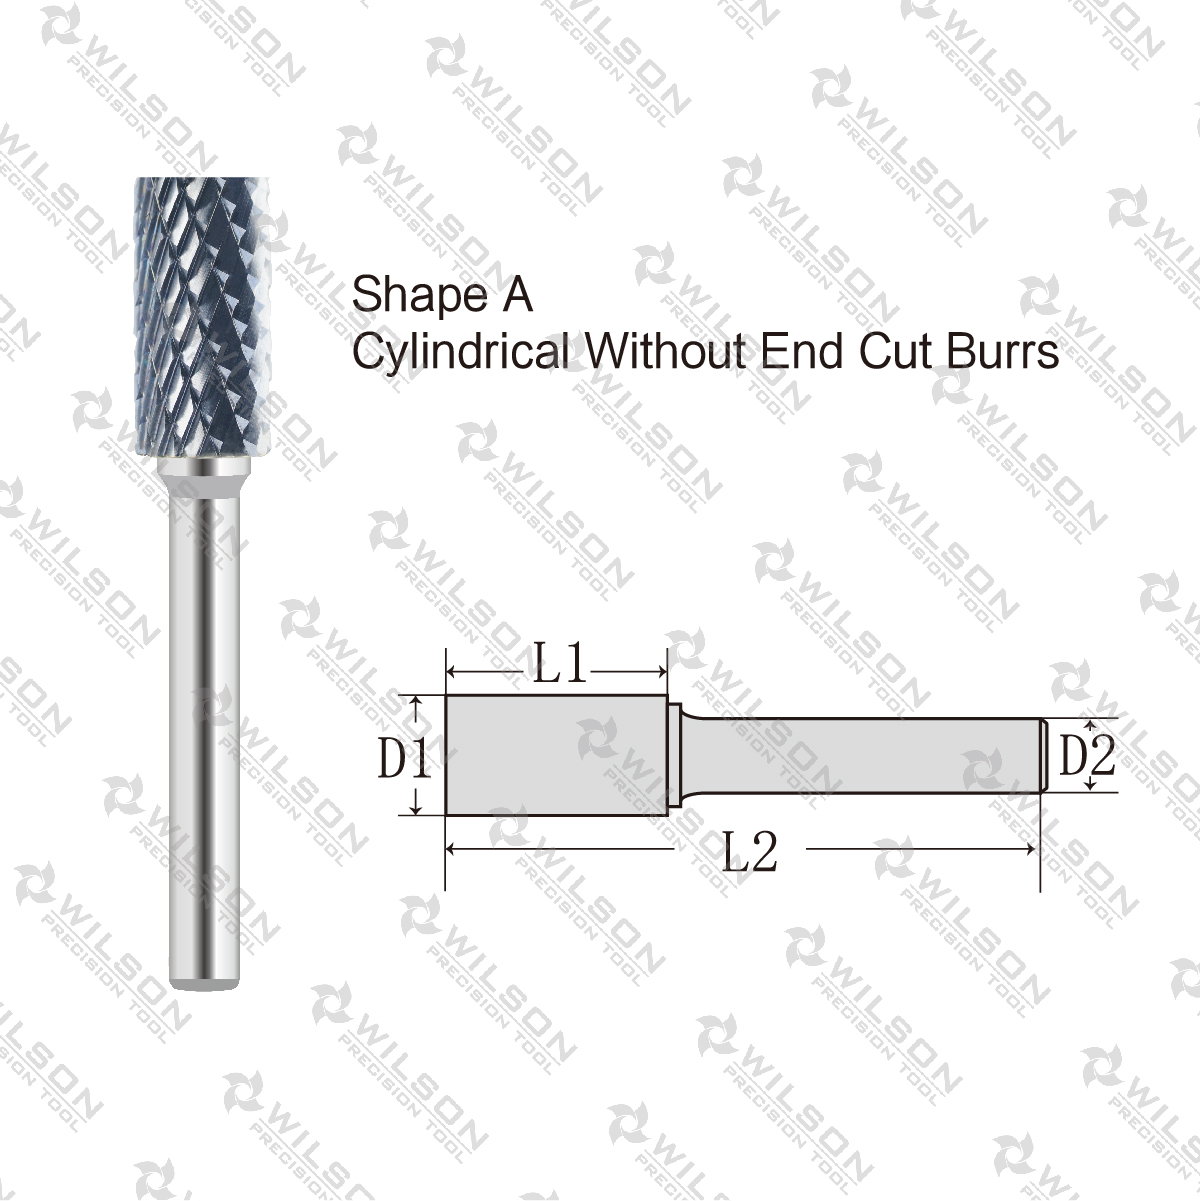 Shape A: Cylindrical Without End Cut - MX Cut